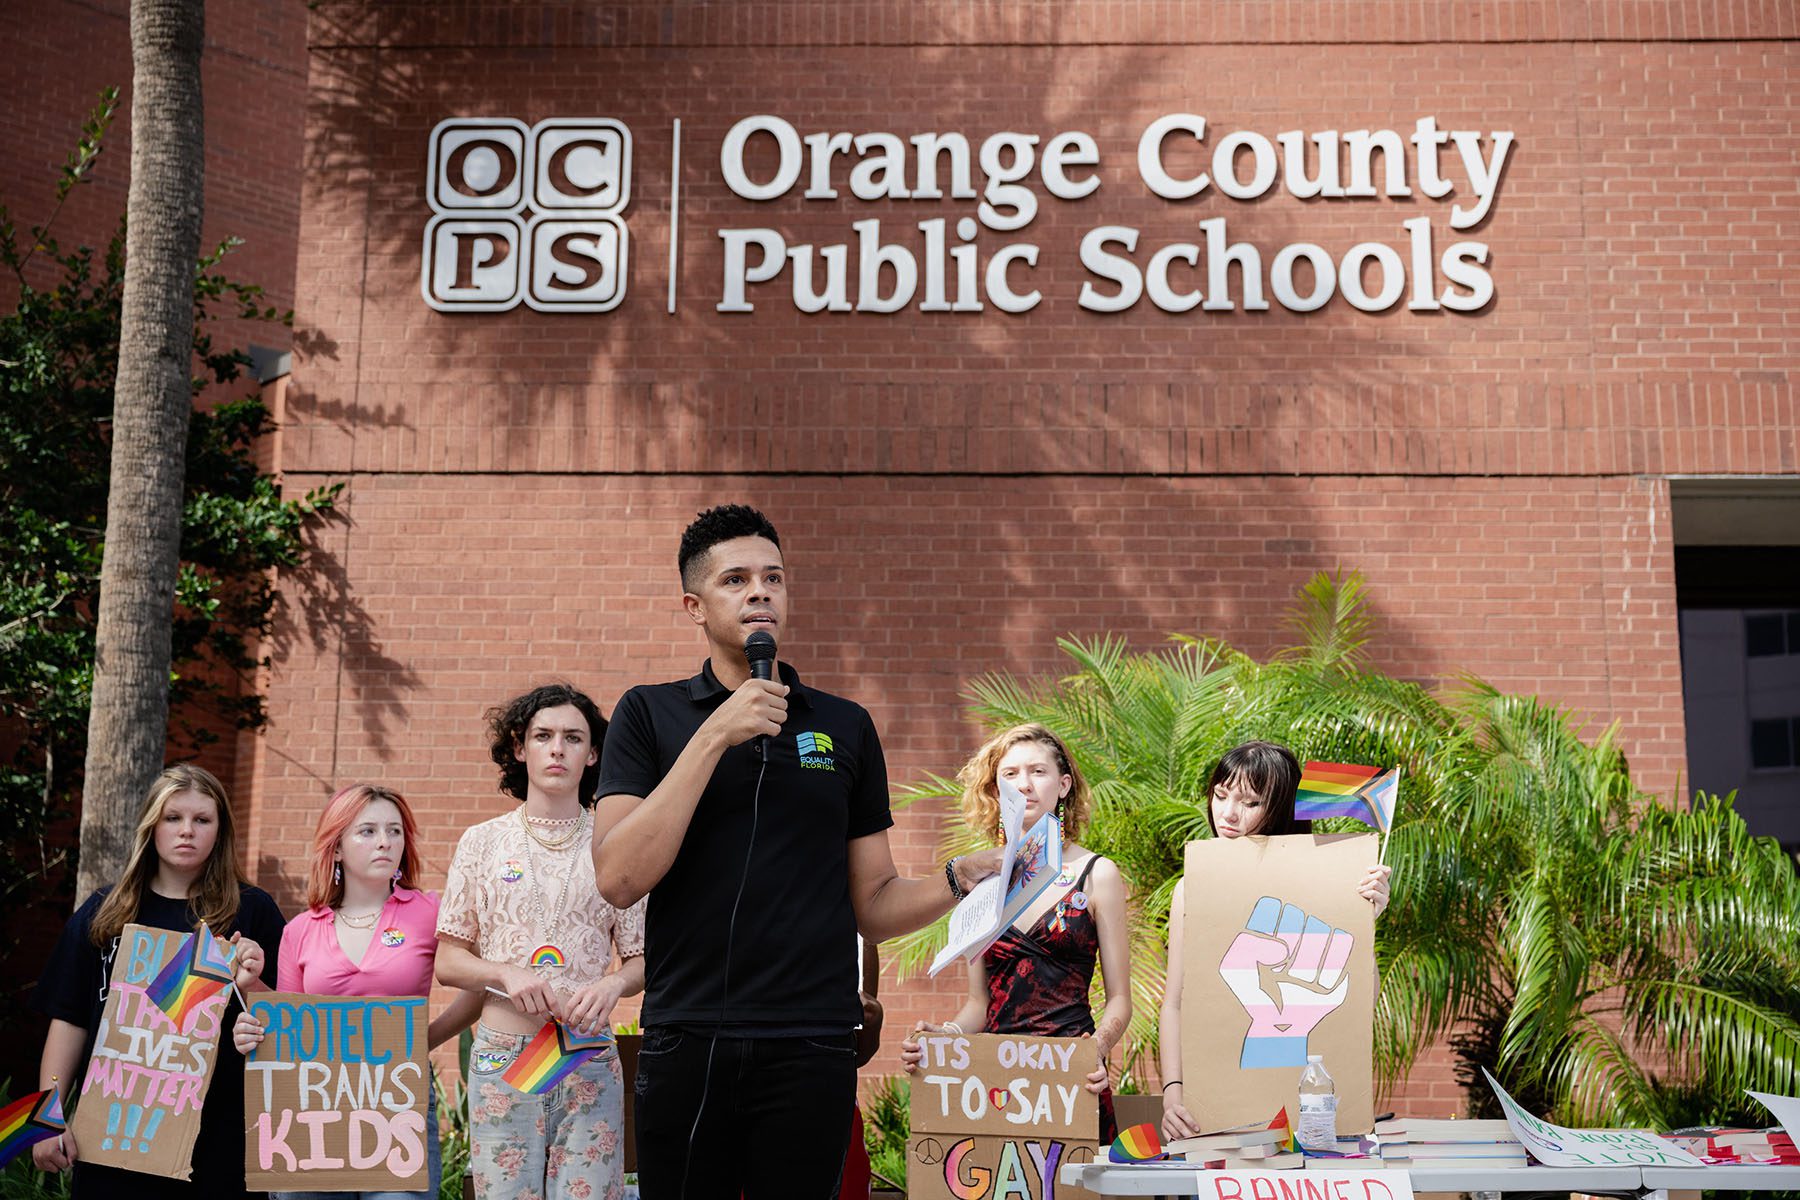 Brandon Wolf speaks outside the Orange County Public Schools board meeting. Behind him, teenagers hold signs that read "It's okay to say gay," "protect trans kids" and "black trans lives matter."